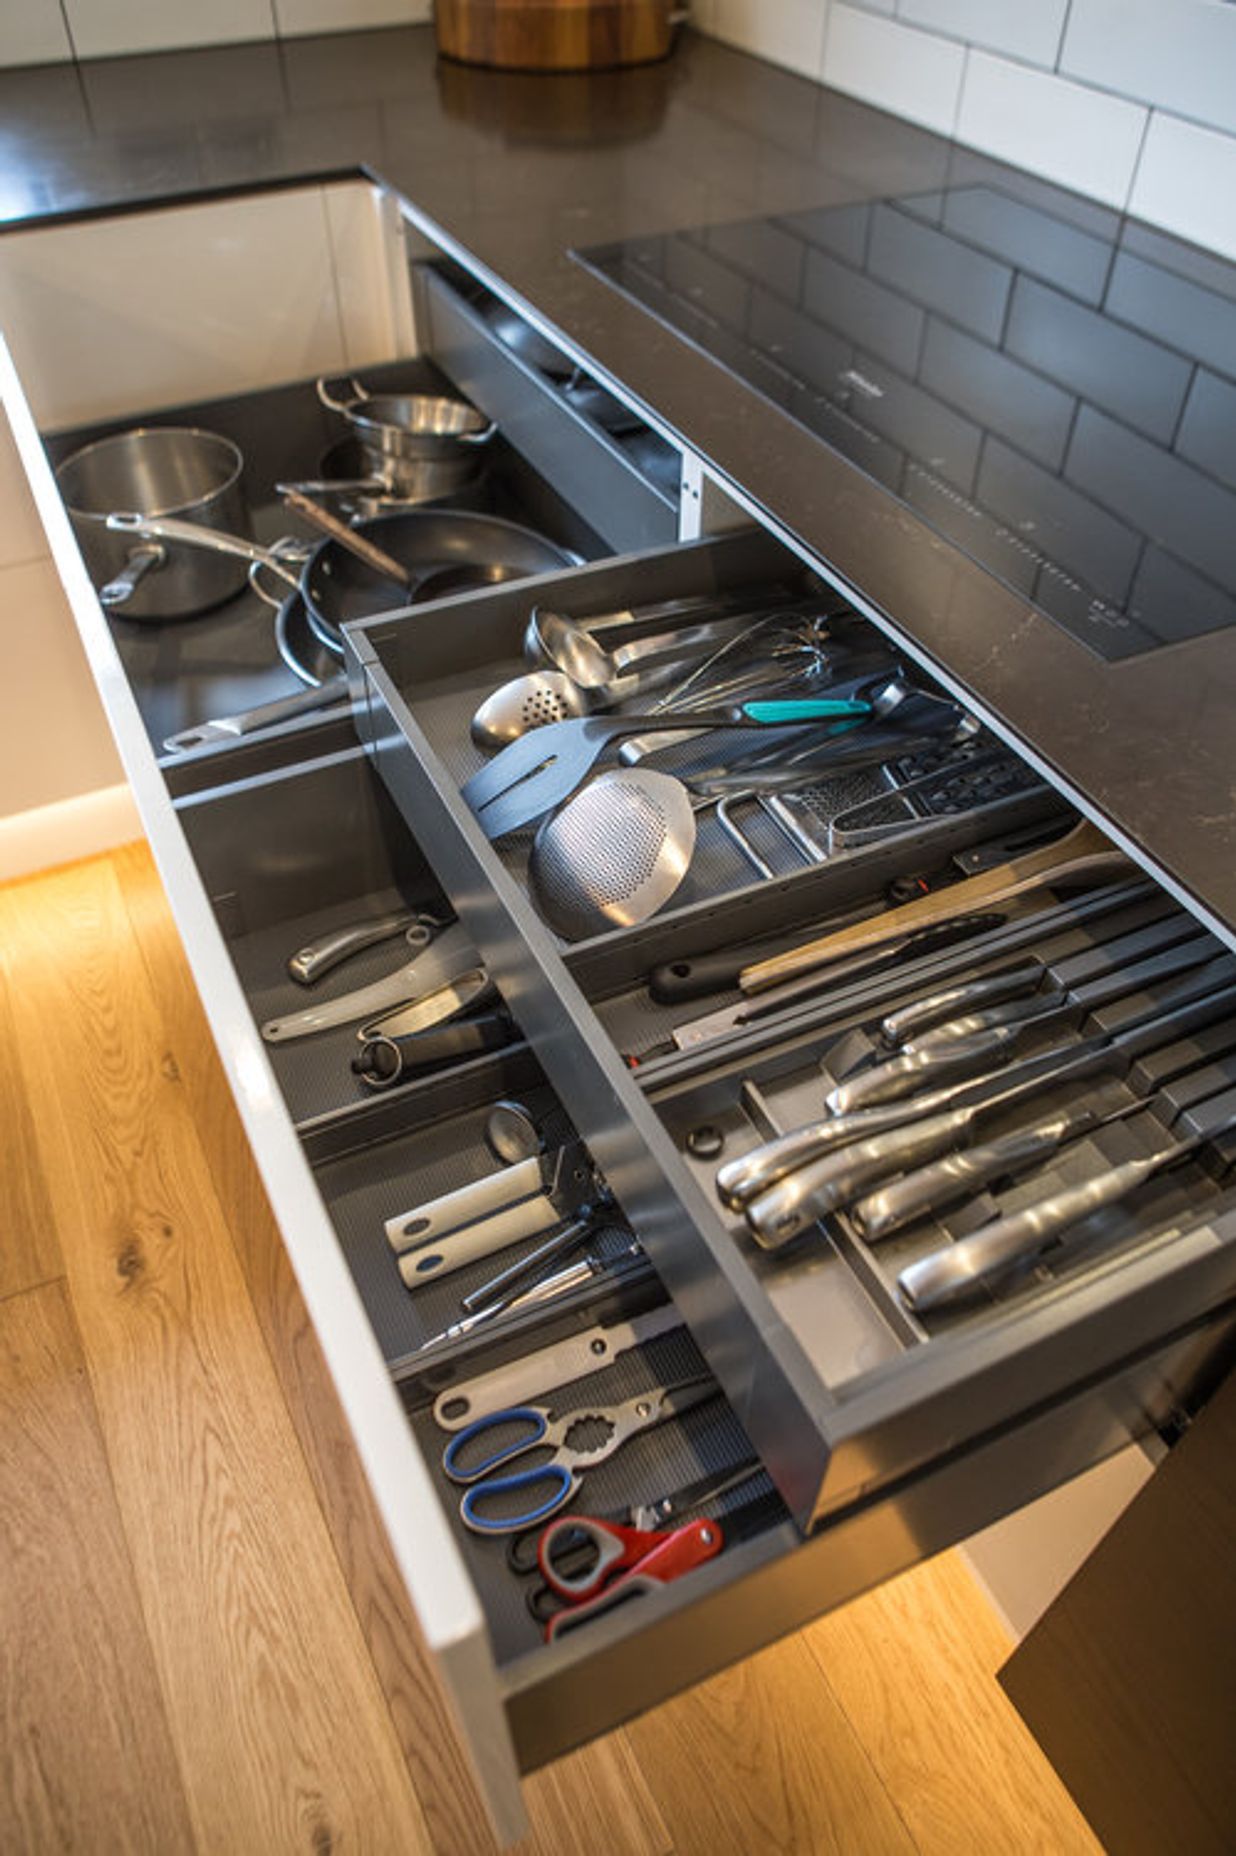 Electronic opening drawers for equipment storage - all small appliances and equipment have a place in this kitchen – specific storage designed for all items.